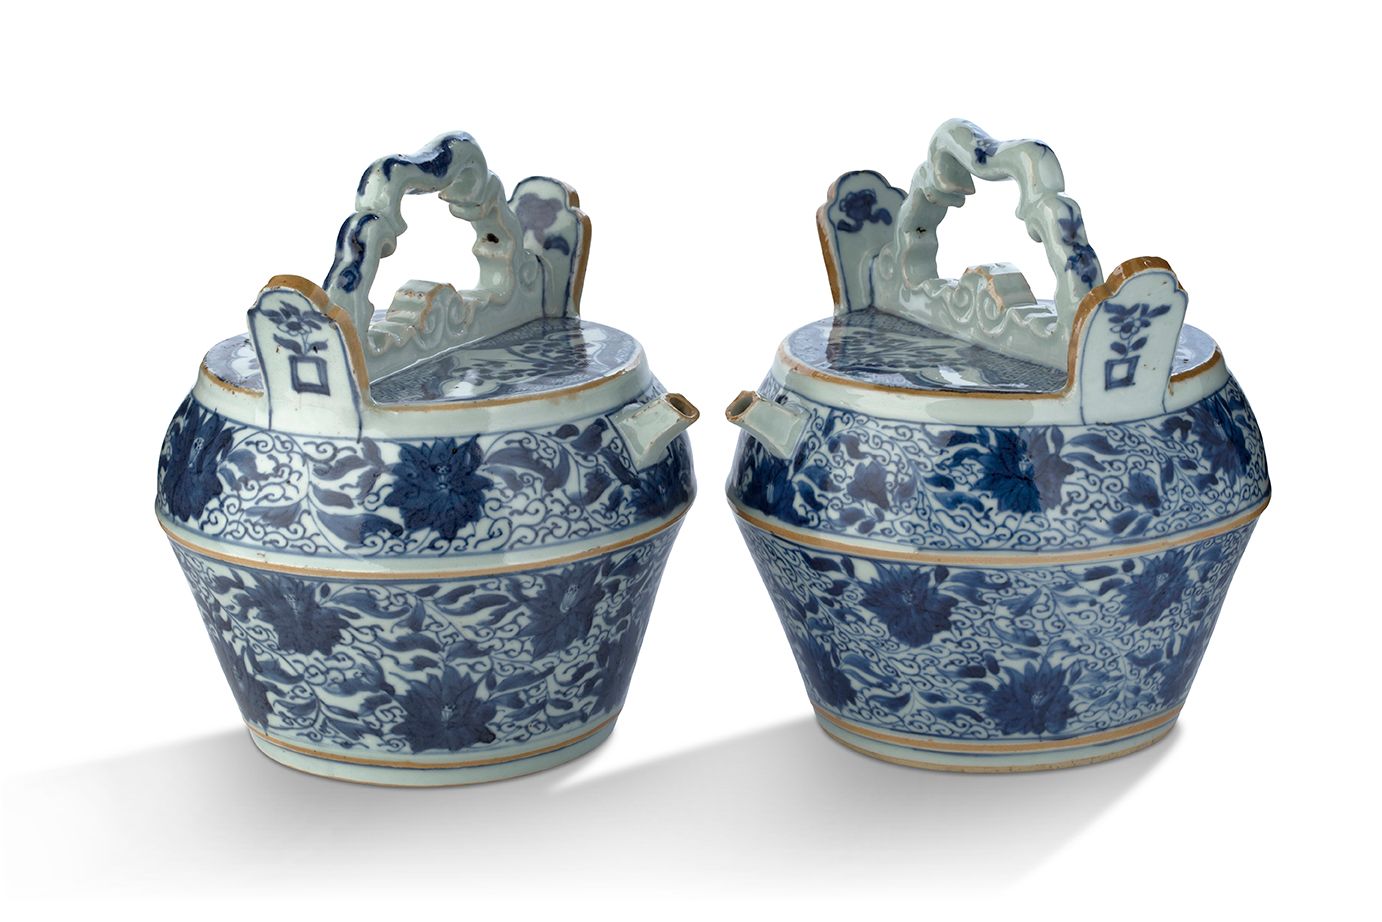 CHINE DYNASTIE QING, ÉPOQUE KANGXI (1661-1722) Pair of pourers
In the form of a &hellip;